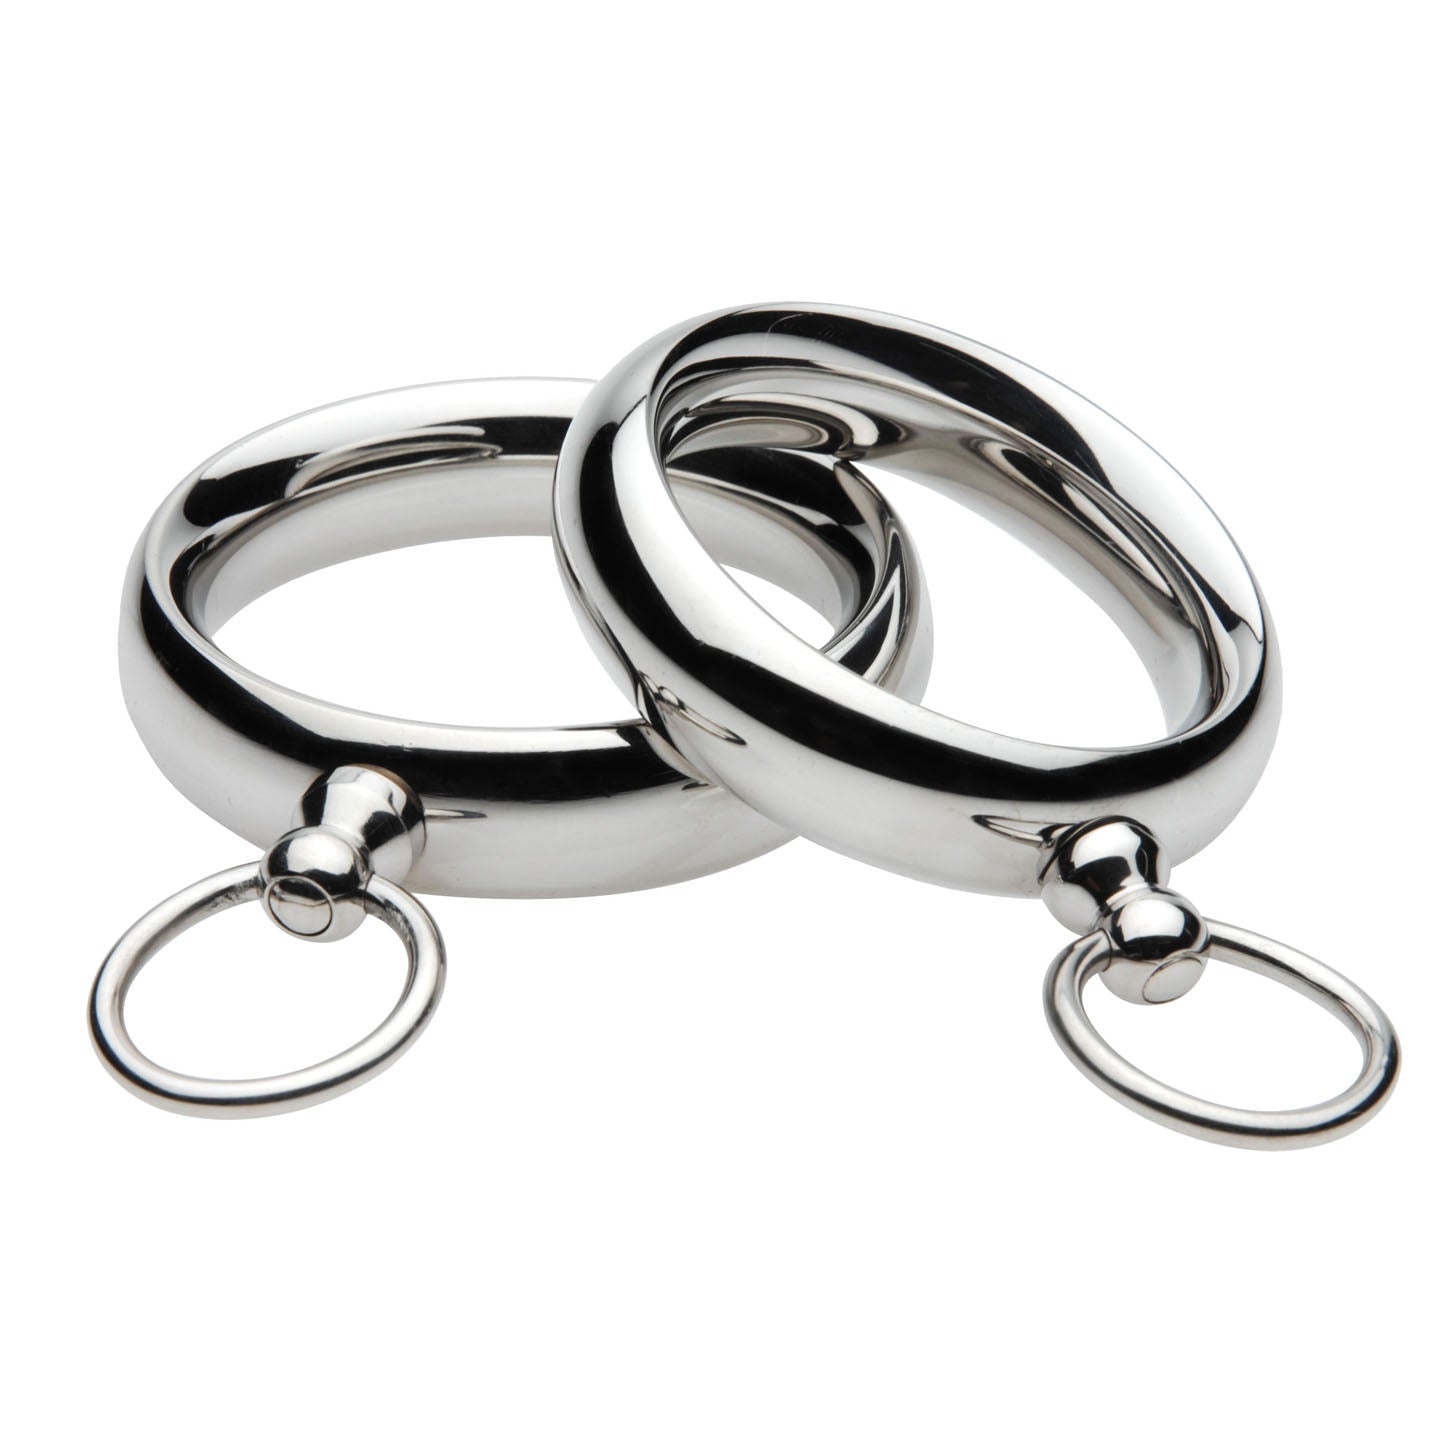 Lead Me Stainless Steel Cock Ring- 1.75